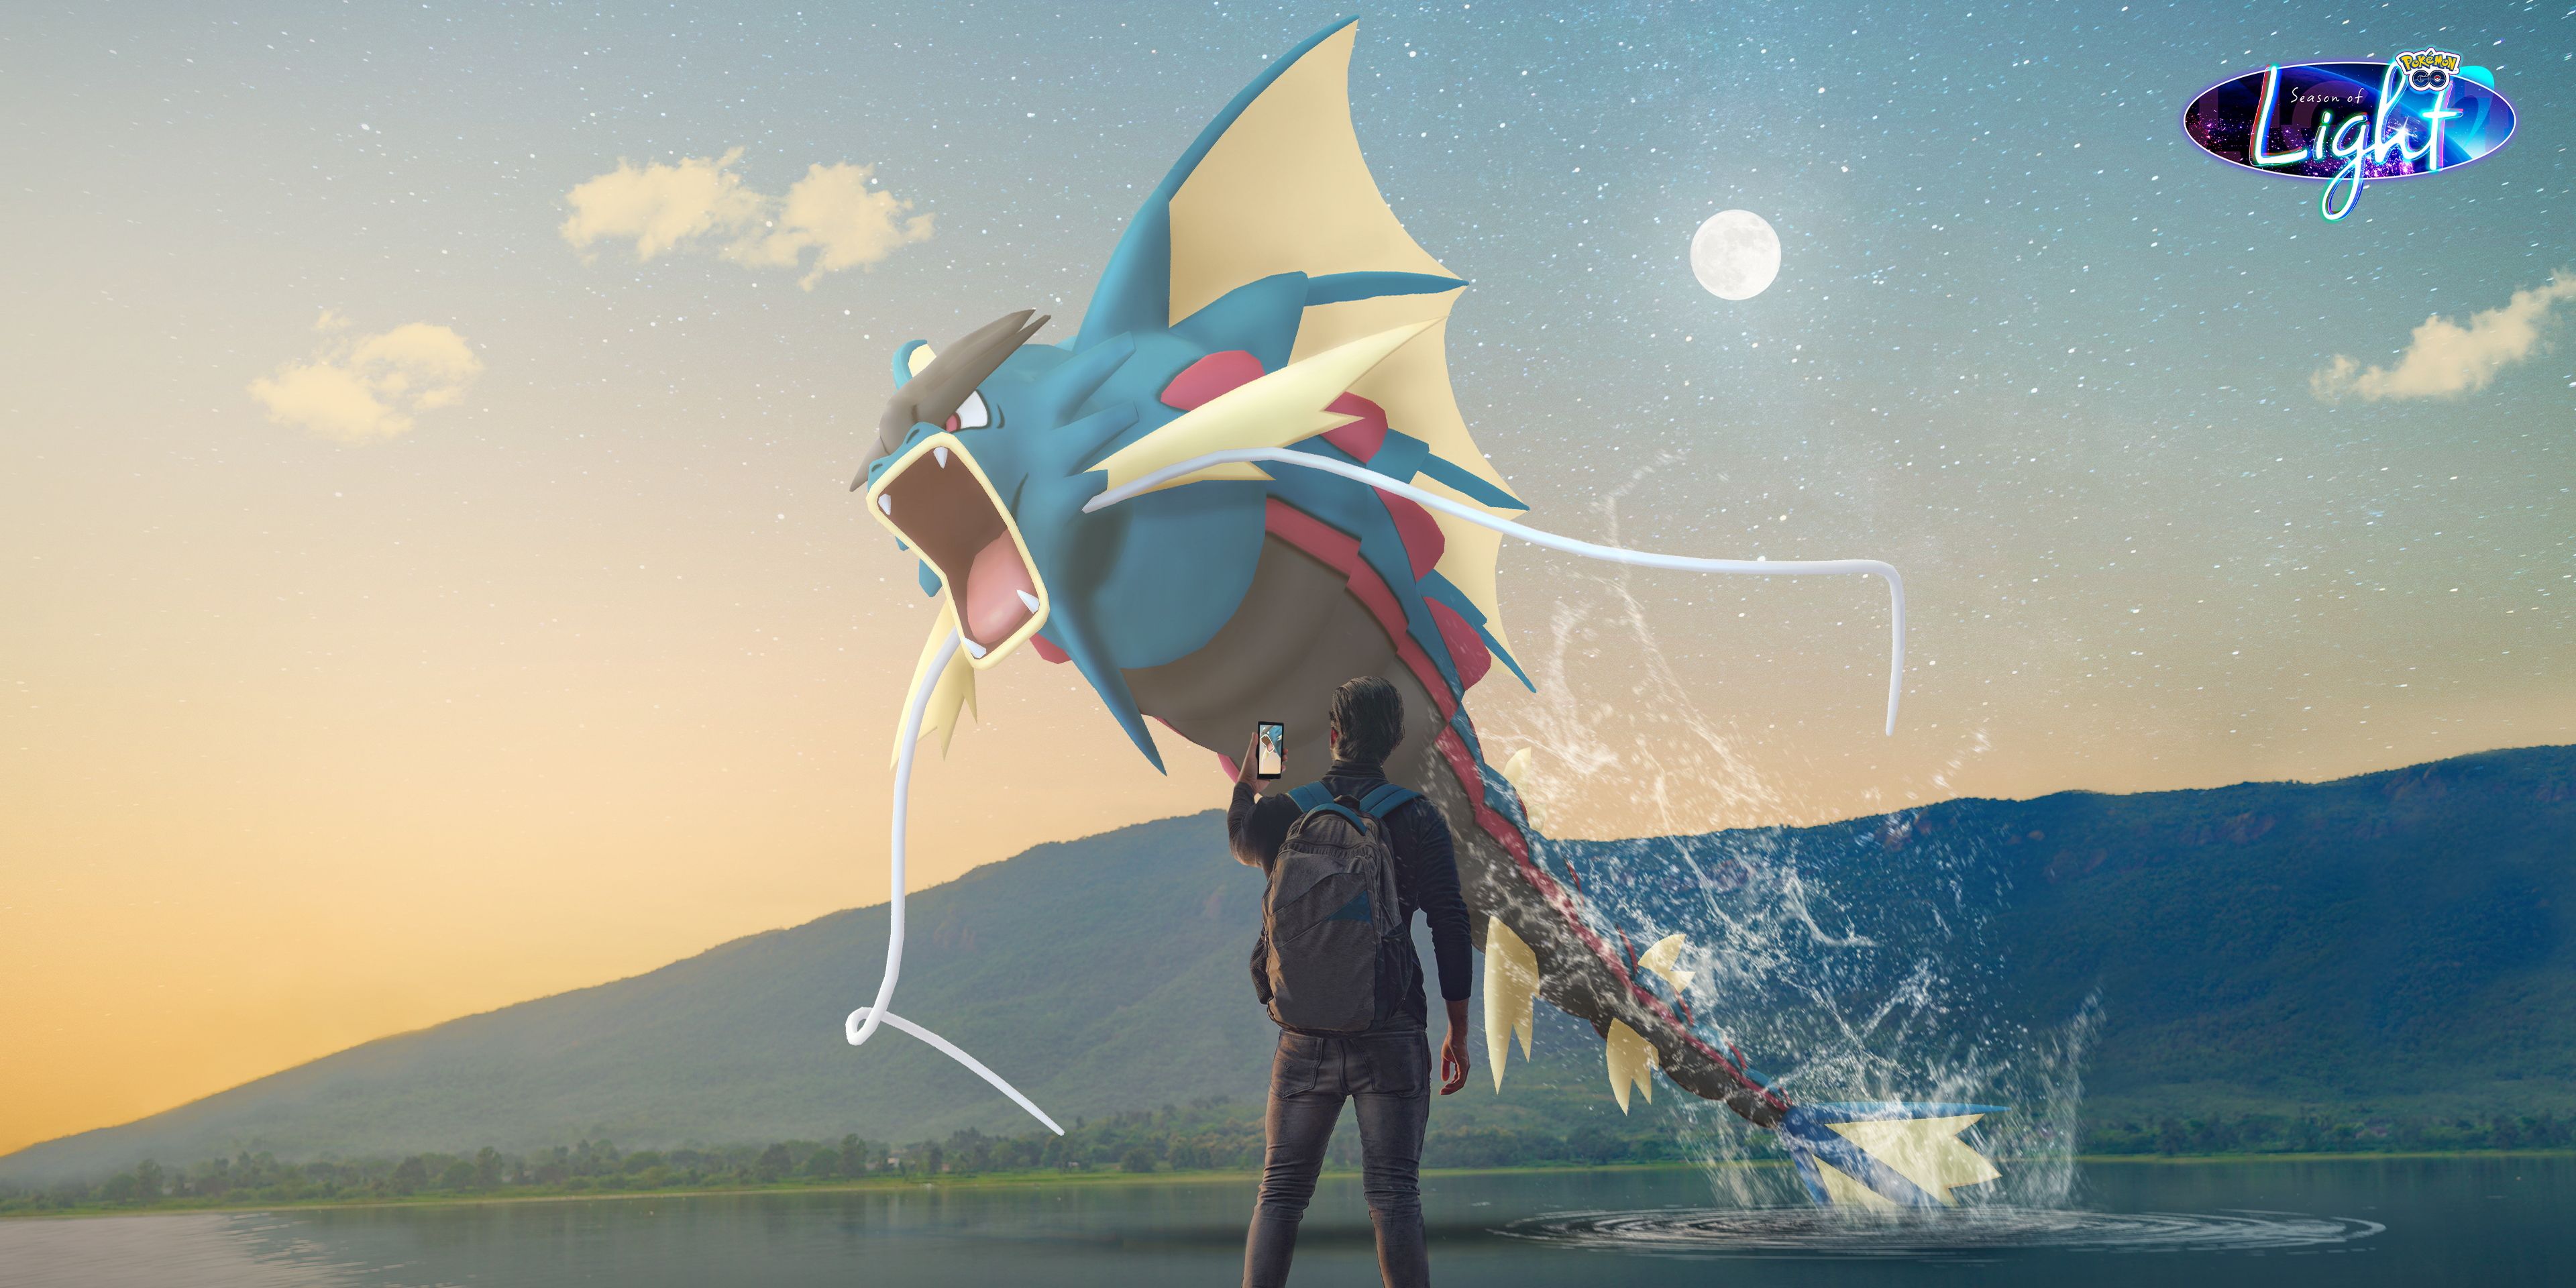 Mega Gyarados jumping out of the water with a person aiming their phone at it